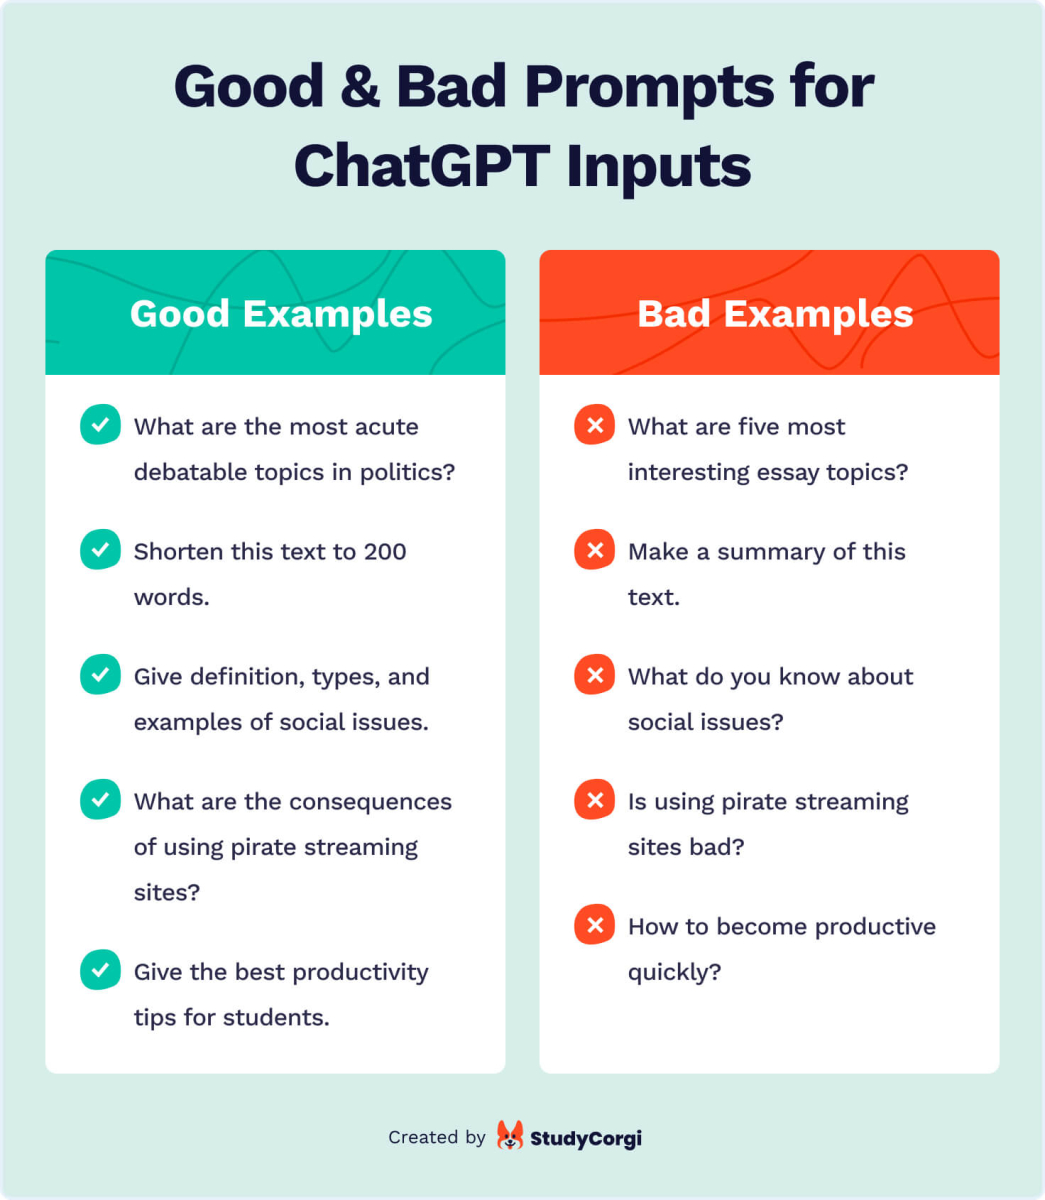 The picture shows good and bad examples of ChatGPT inputs.